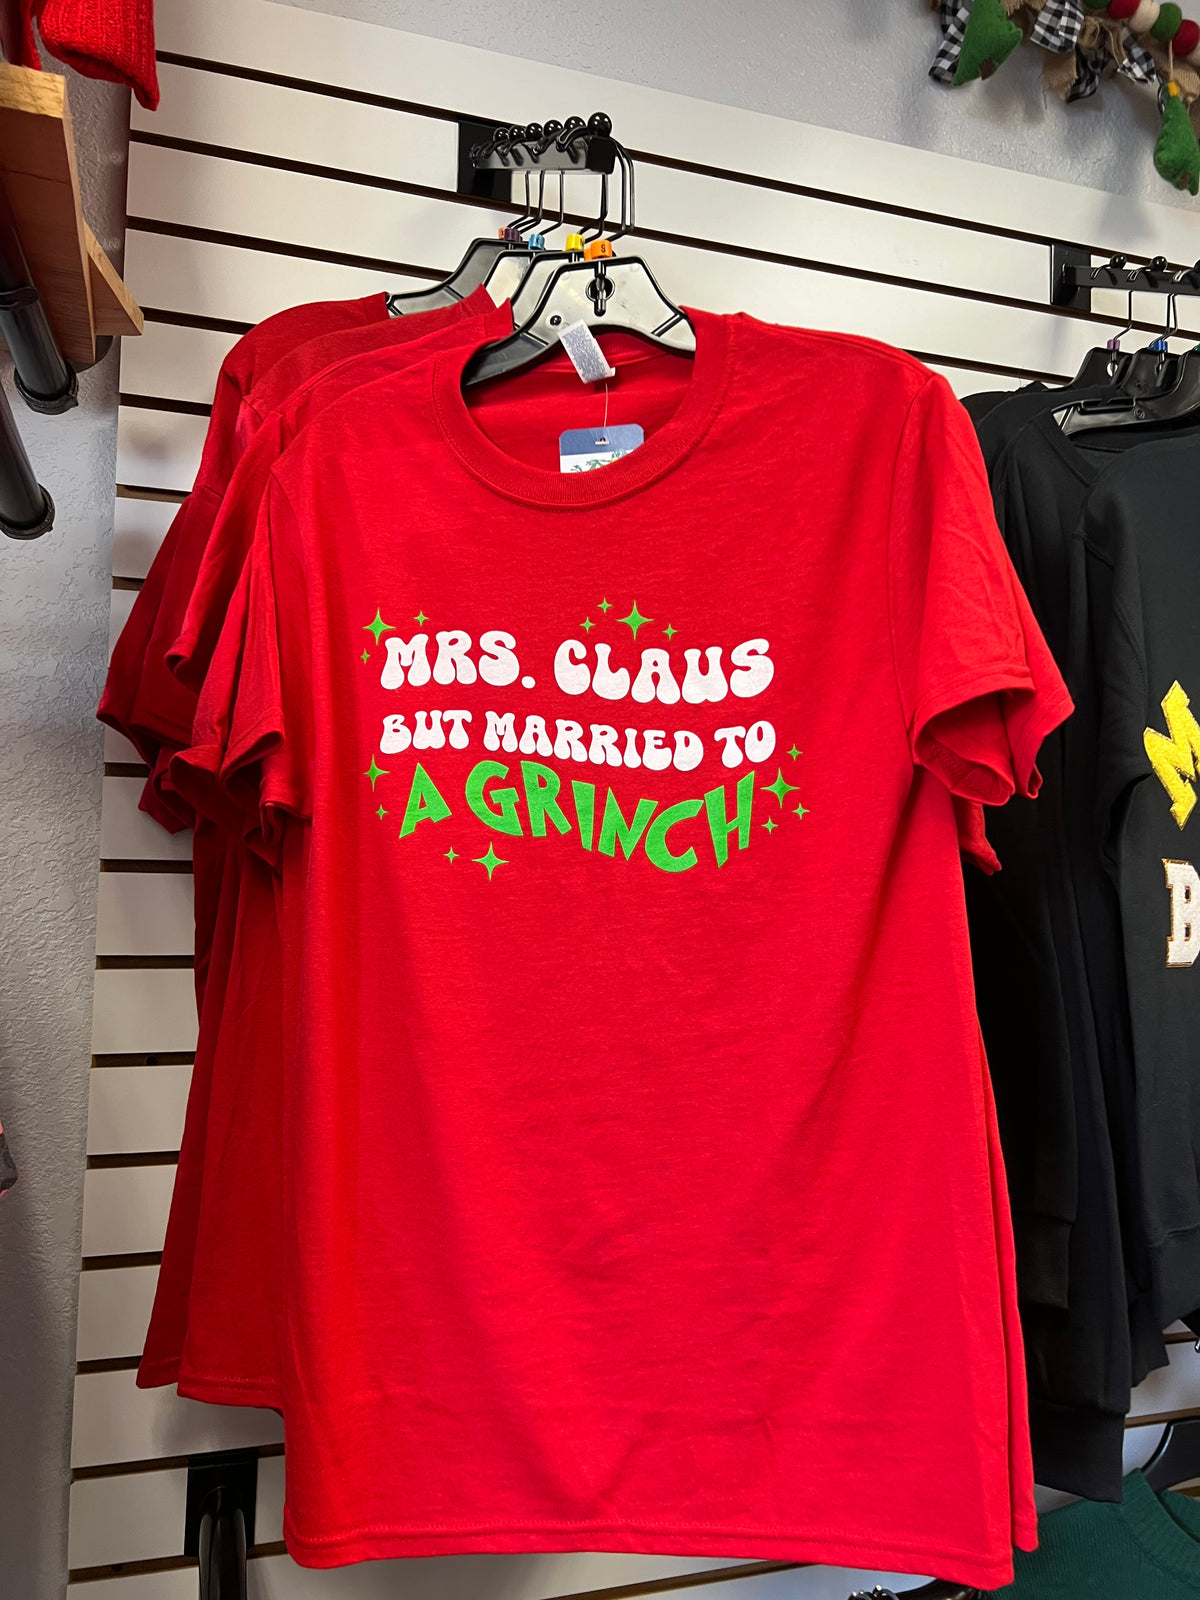 Mrs.Claus Married to the Grinch*